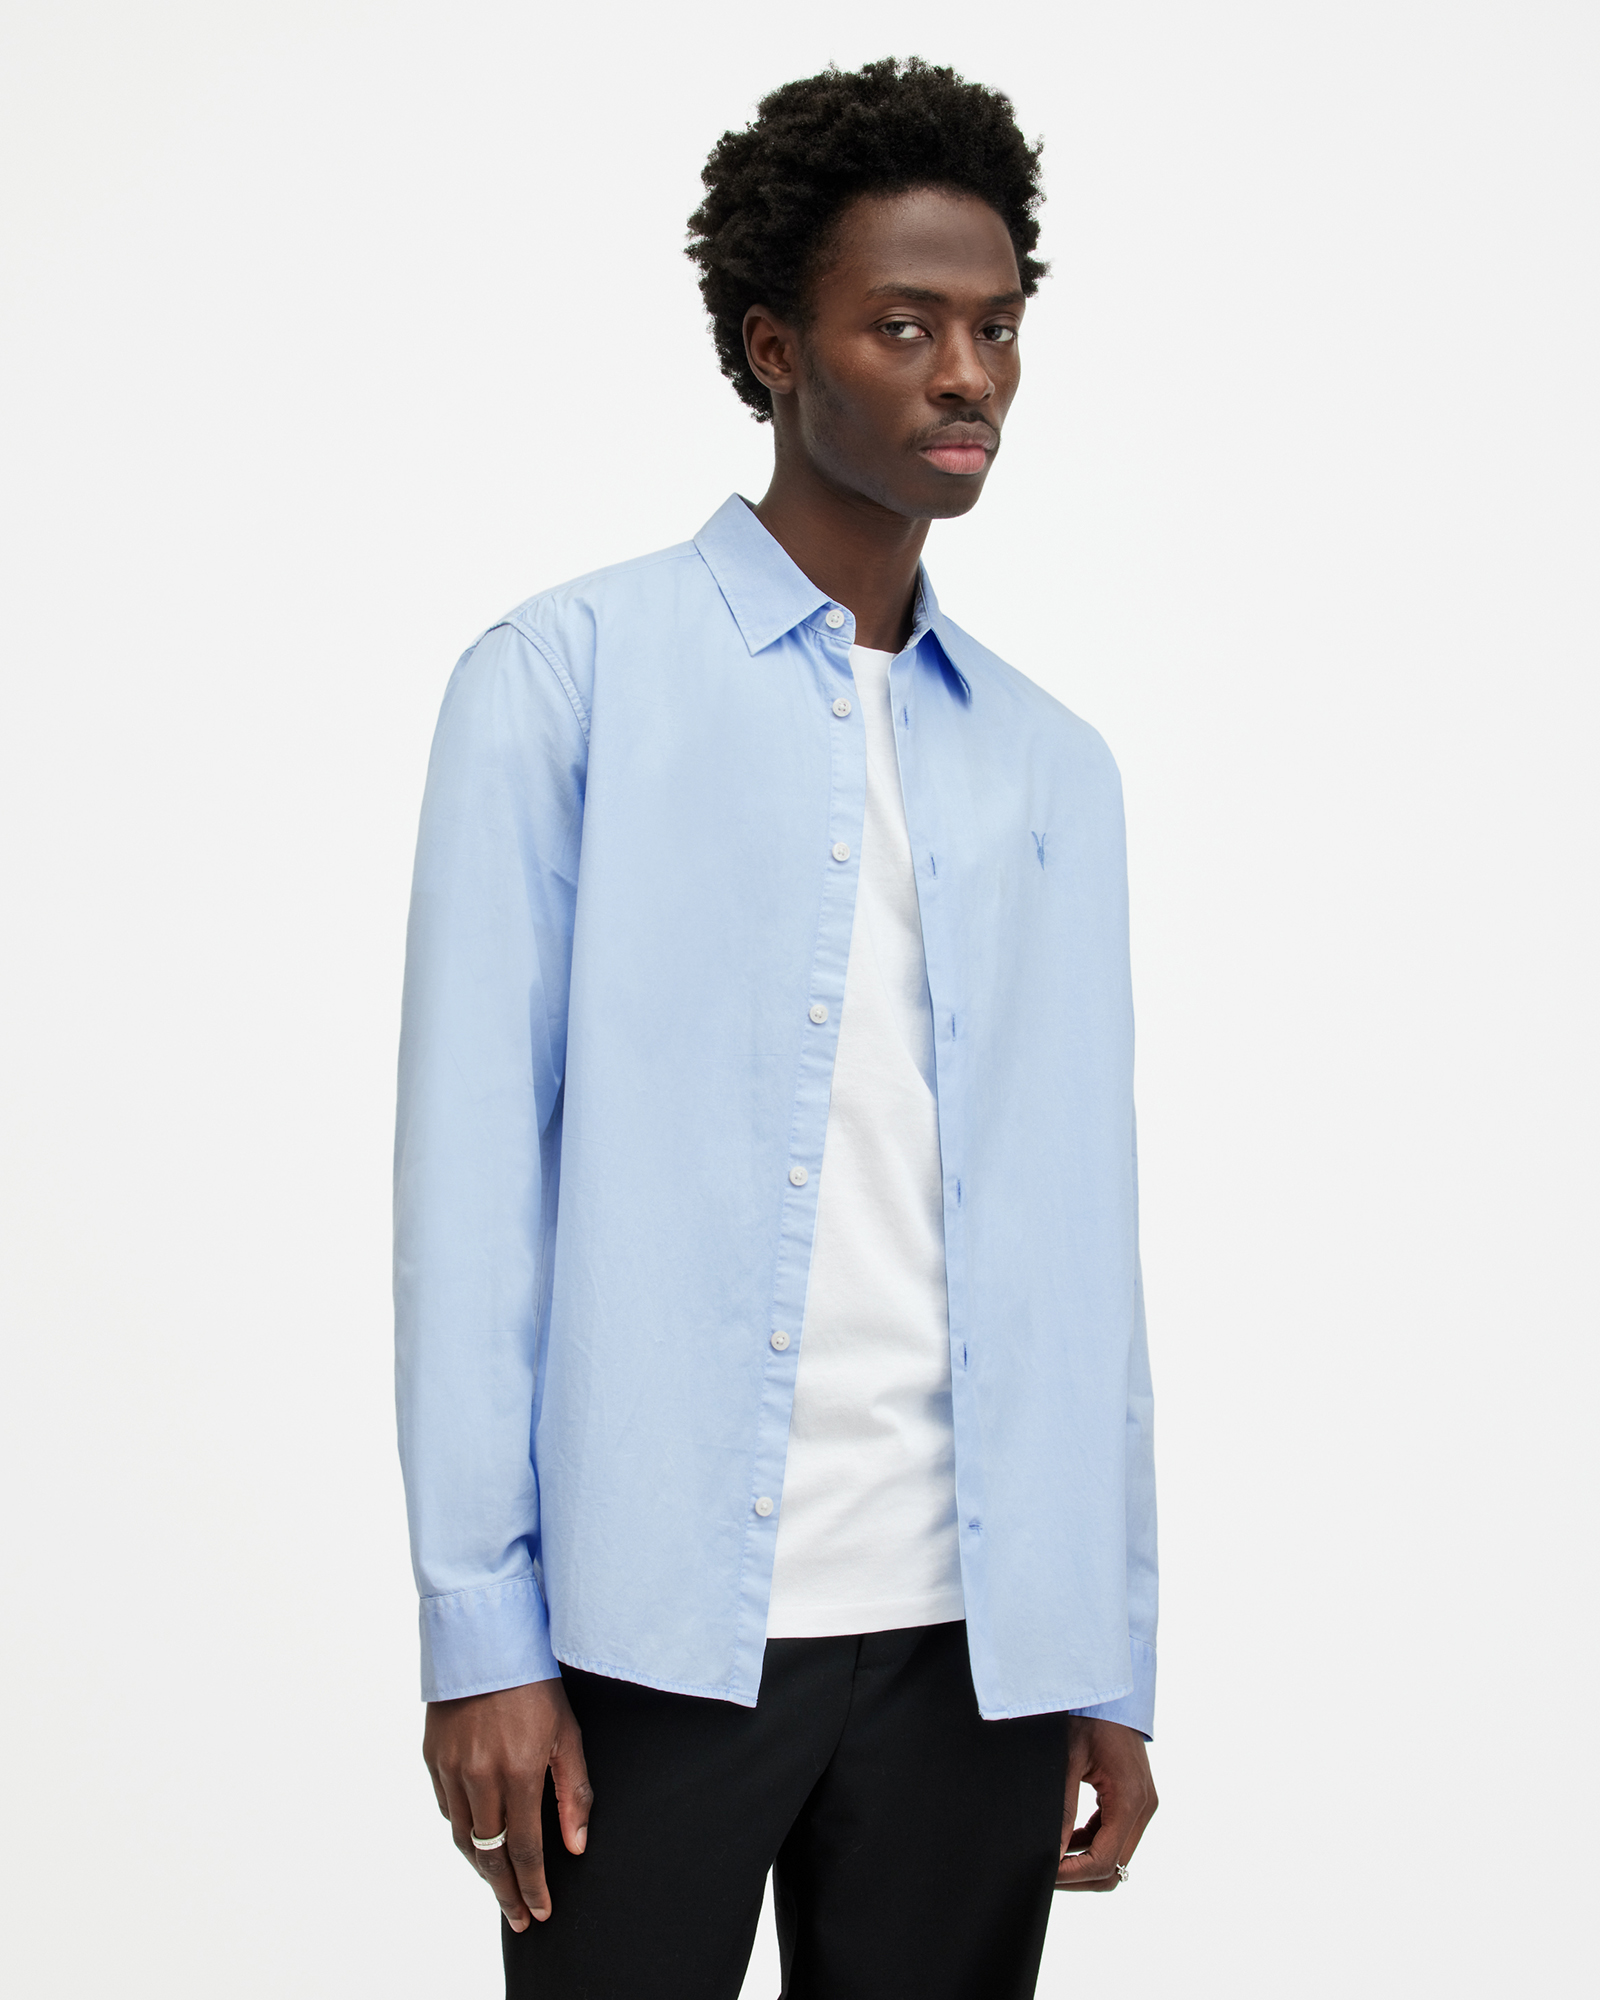 AllSaints Tahoe Garment Dyed Relaxed Fit Shirt,, BETHEL BLUE